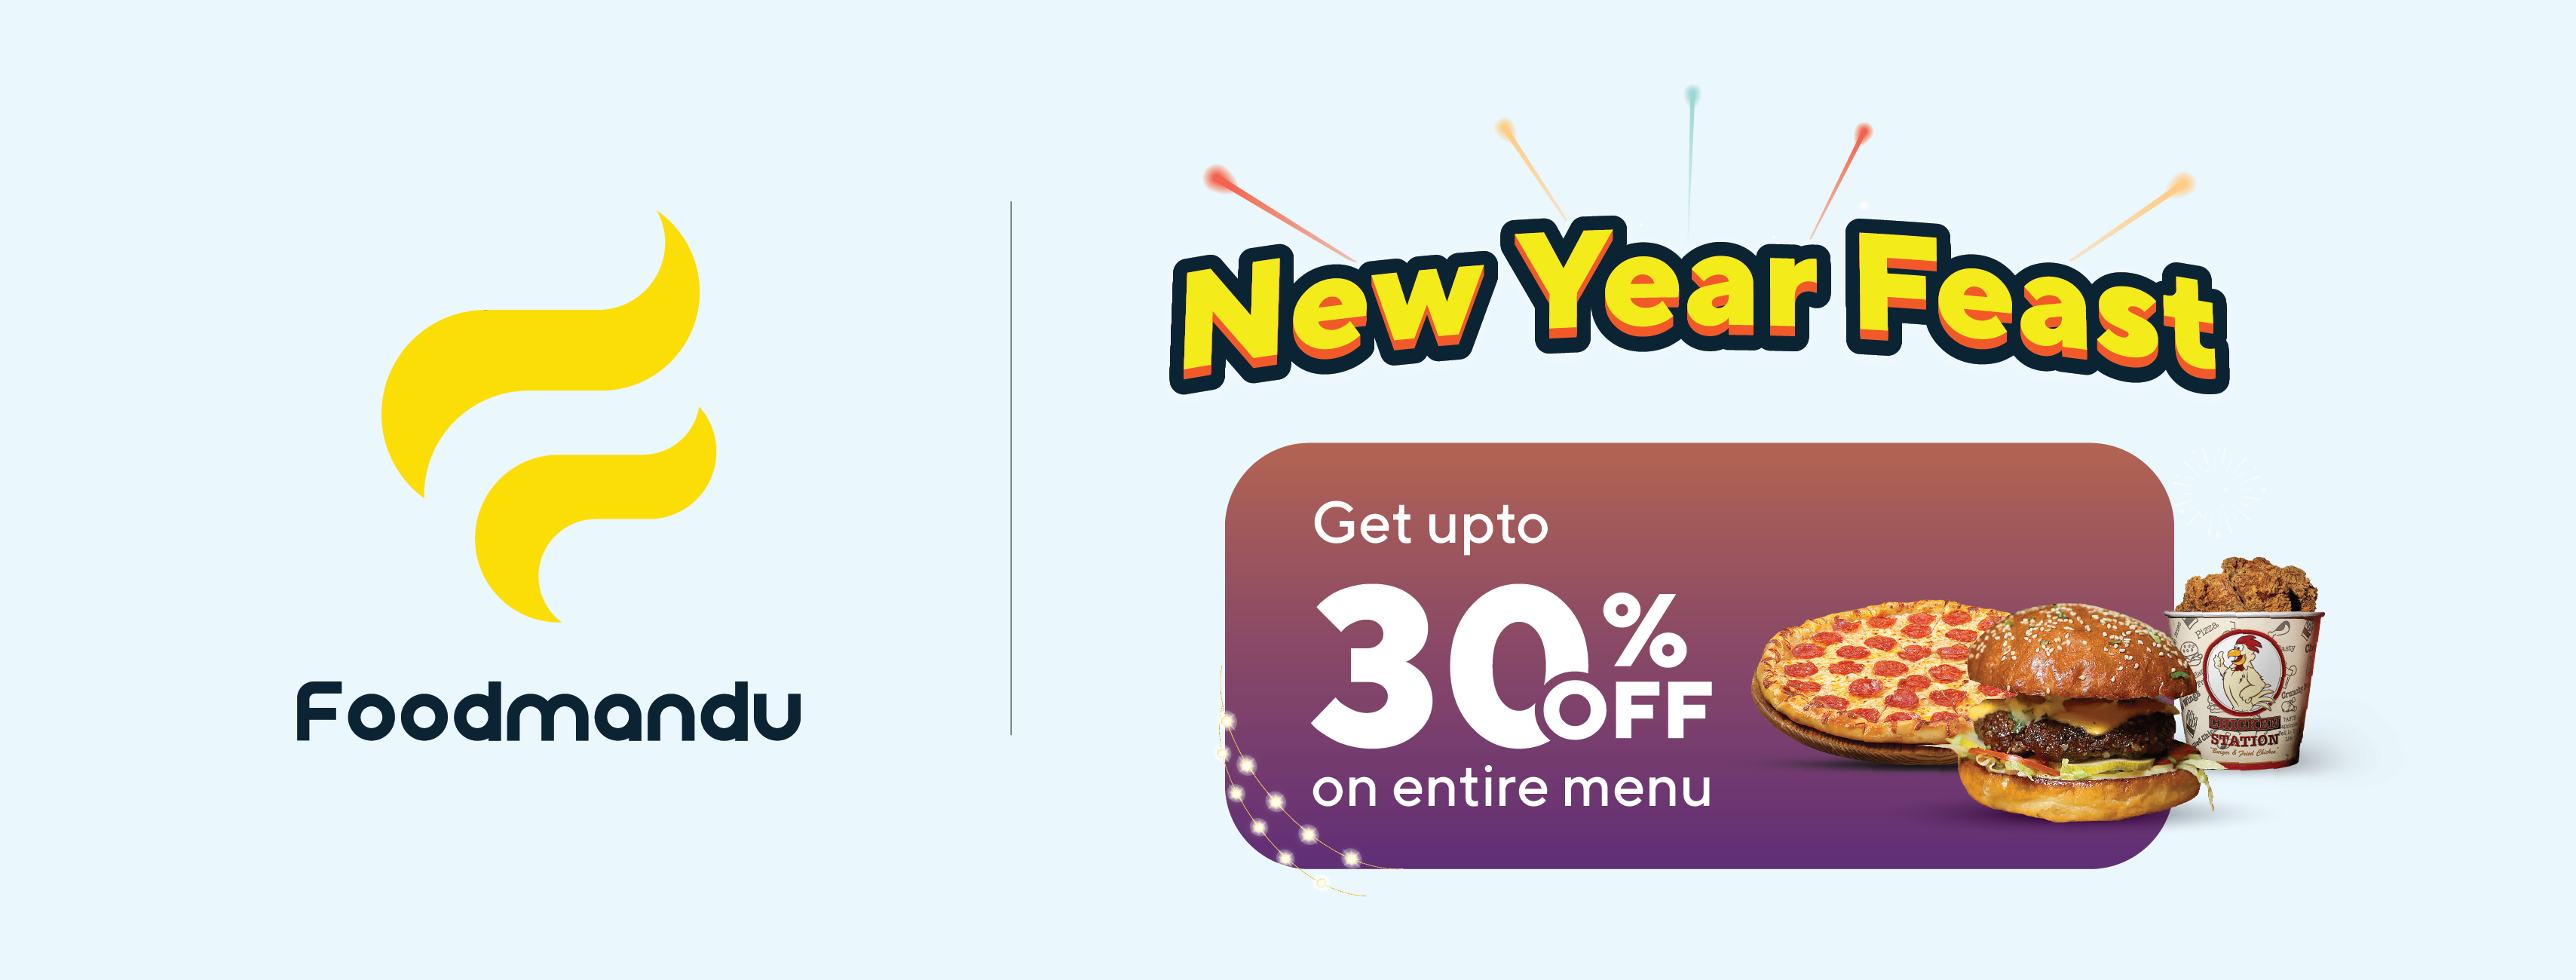 Foodmandu offers up to 30% off and daily voucher codes as a part of its New Year Feast scheme